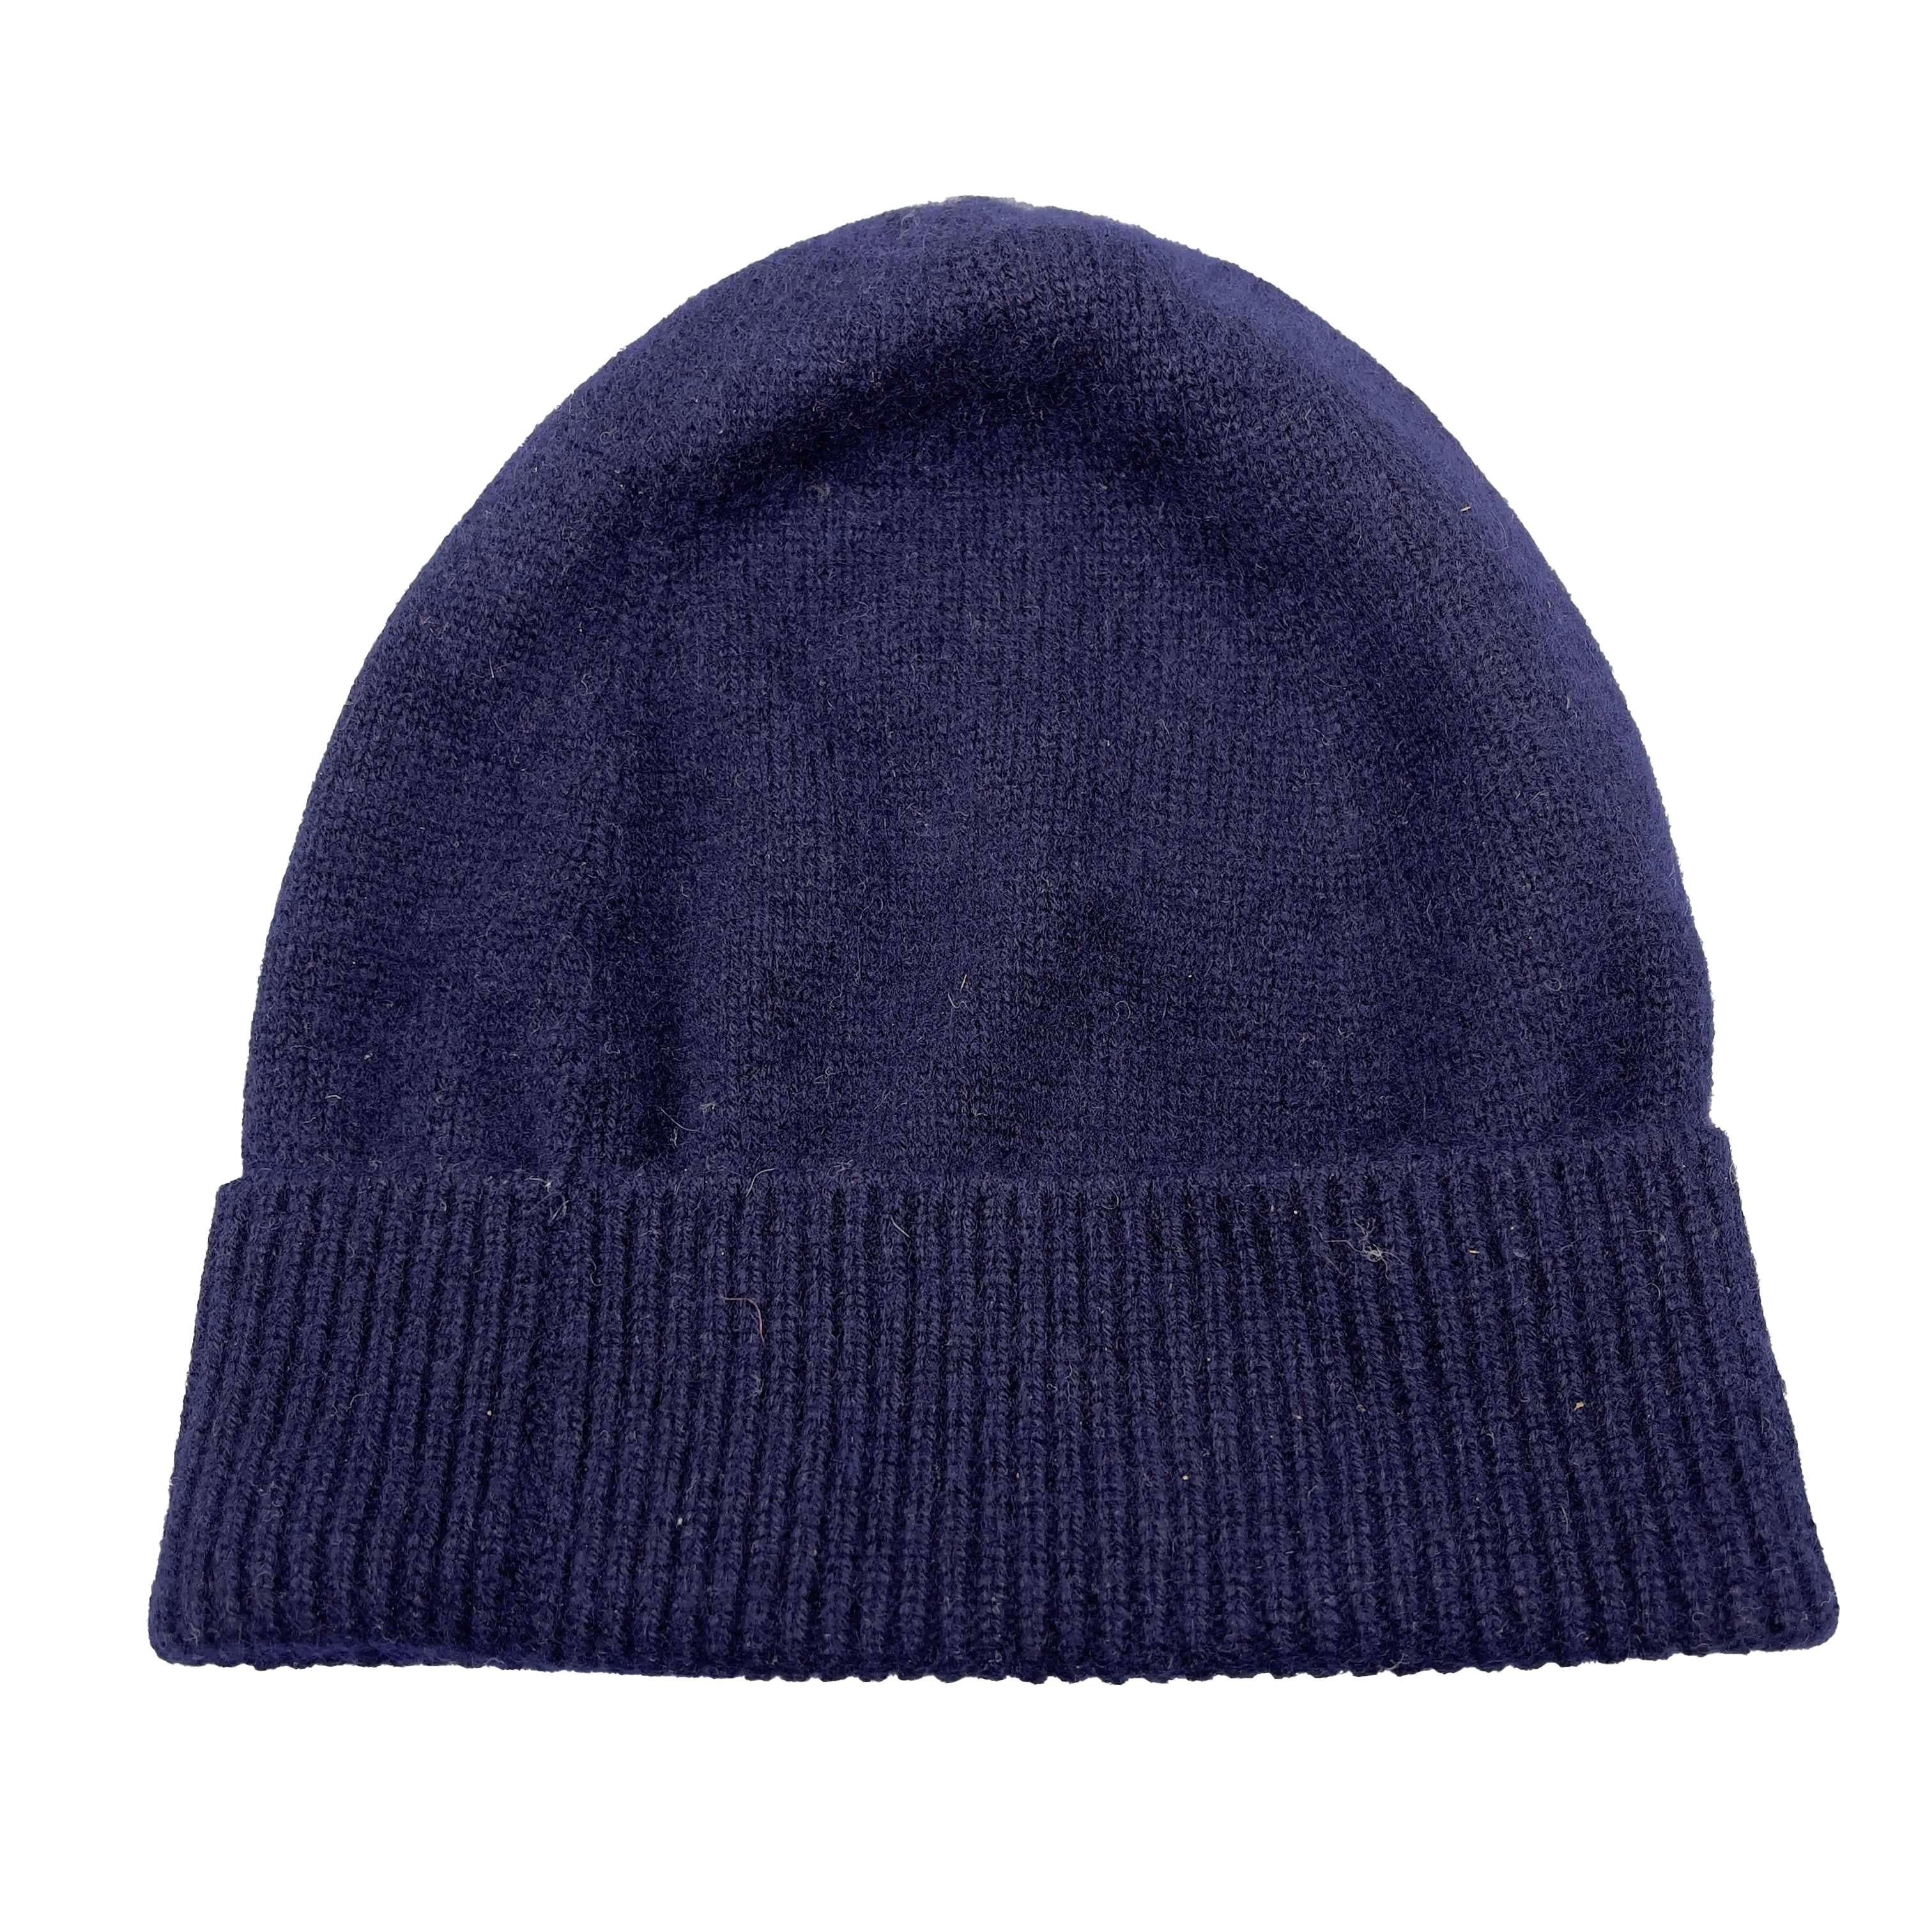 CHANEL - Cashmere CC Logo Beanie - Navy Blue Hat - CC Logo - One Size 

Description

This soft beanie is made of 100% cashmere in navy blue.
Chanel Paris CC logo button at front.
Ribbed fold up hem.

Measurements

Inner Circumference: 21 in / 53.34